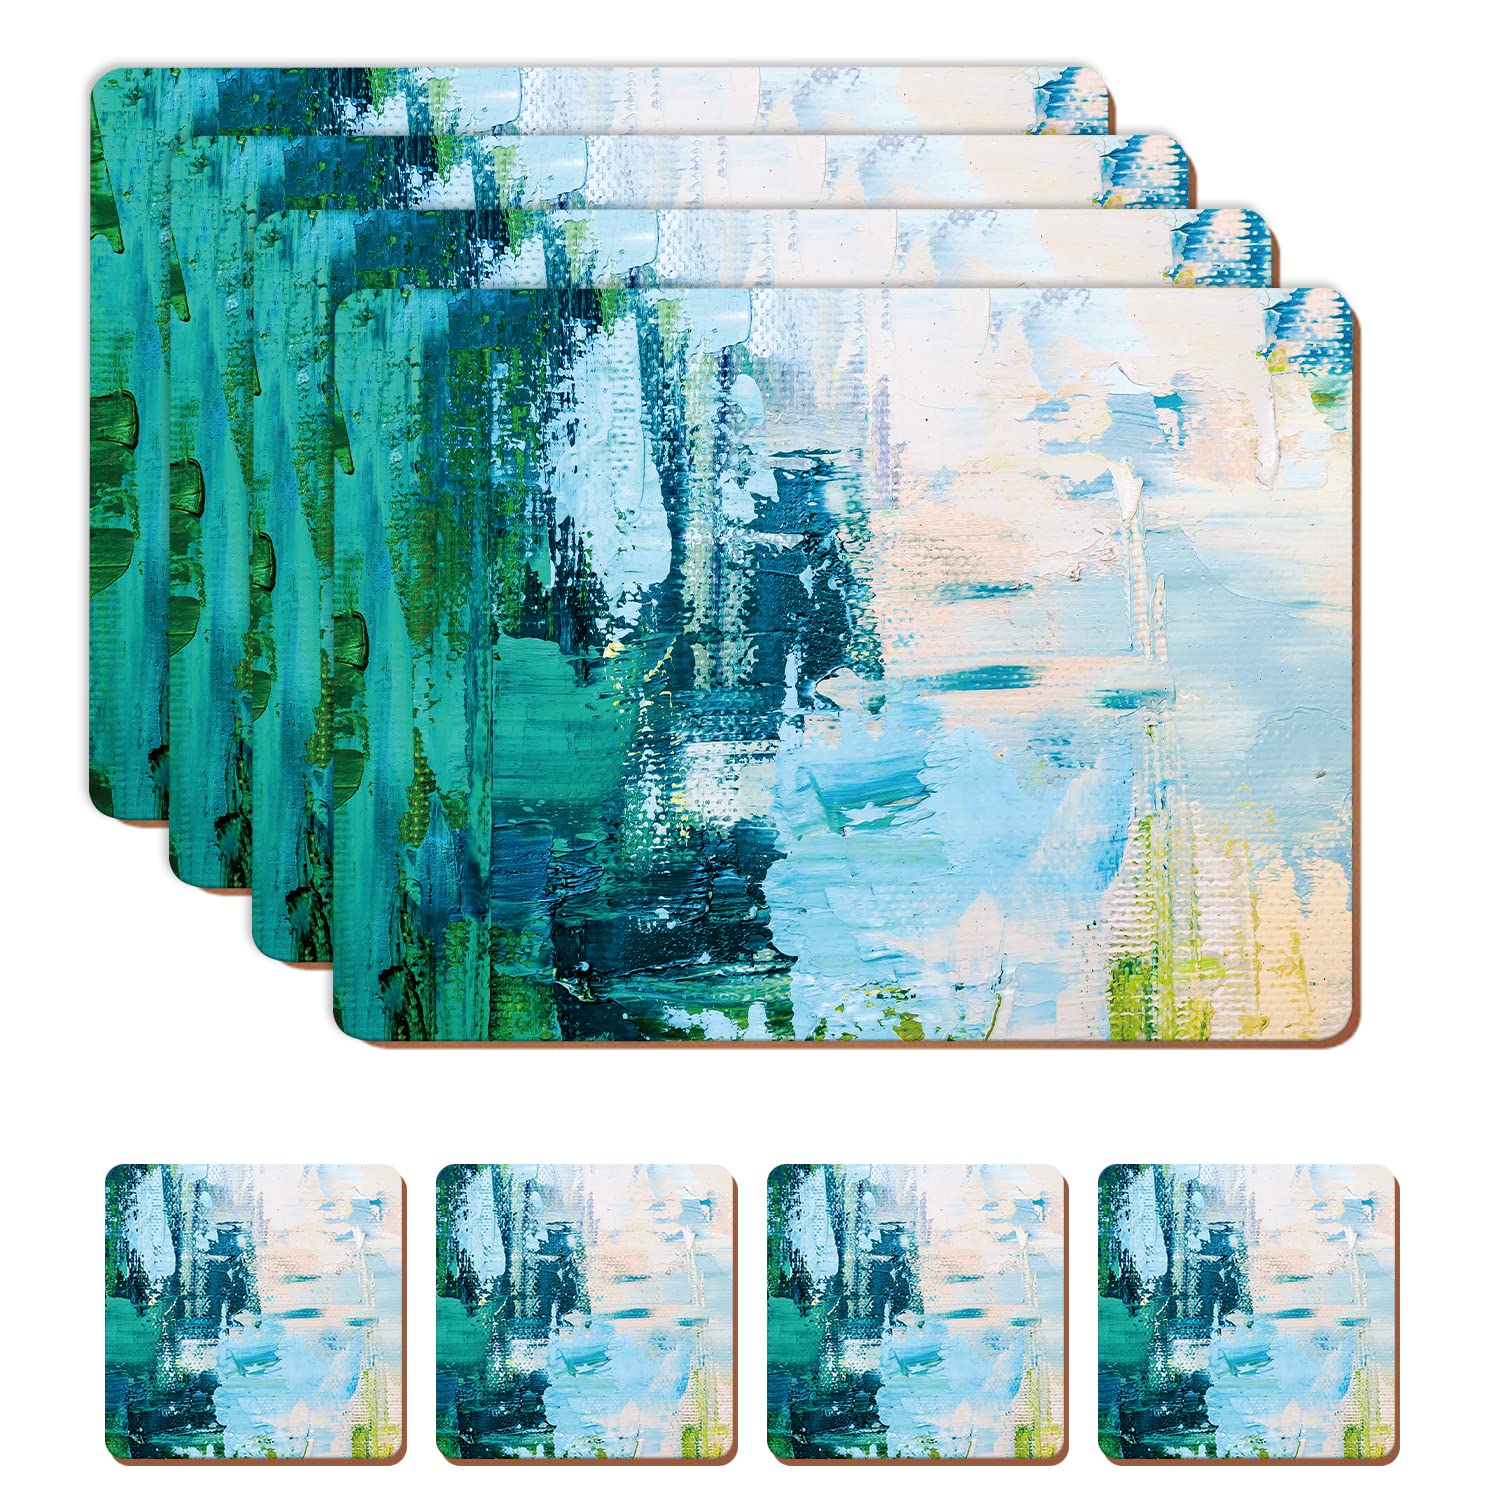 HAOCOO Placemats, Coasters and Place Mats Set-4, Heat Resistant Waterproof Non-Slip Wooden Placemats Table Mats for Dining Kitchen Outdoor, Easy to Clean Cork Placemats 30x21.5cm(Abstract Painting)